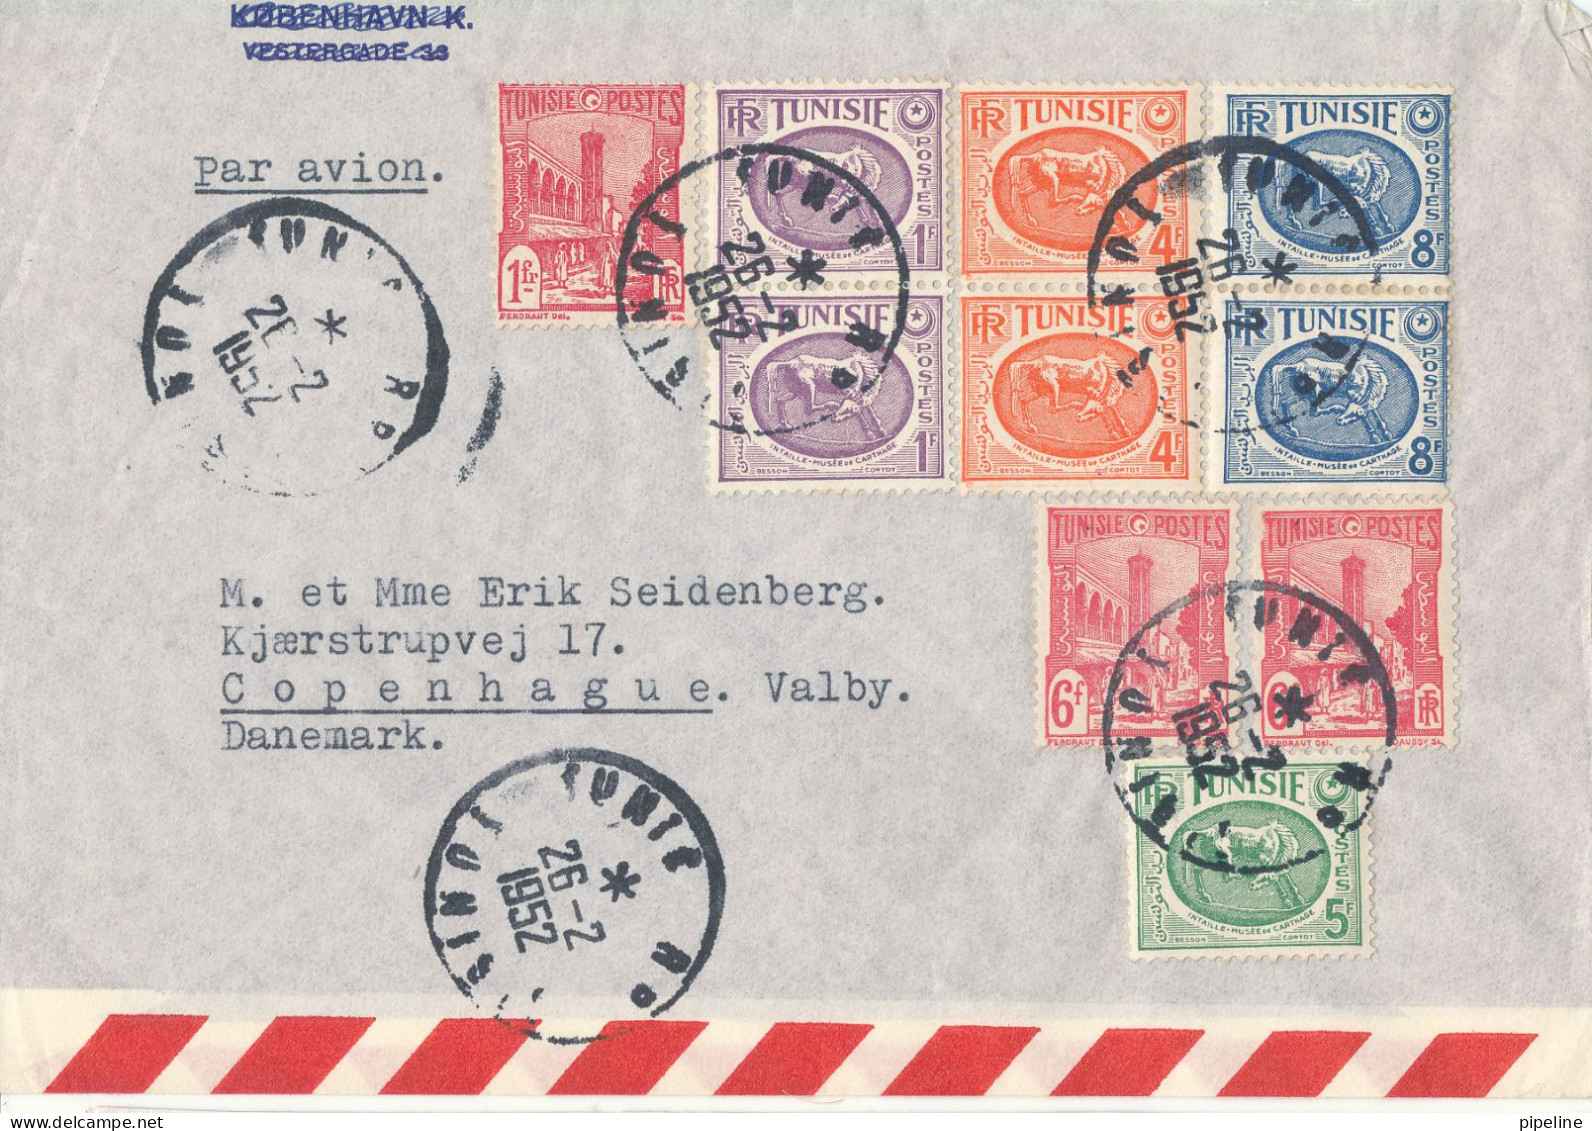 Tunisia Air Mail Cover Sent To Denmark 26-2-1952 With A Lot Of Stamps - Tunisia (1956-...)